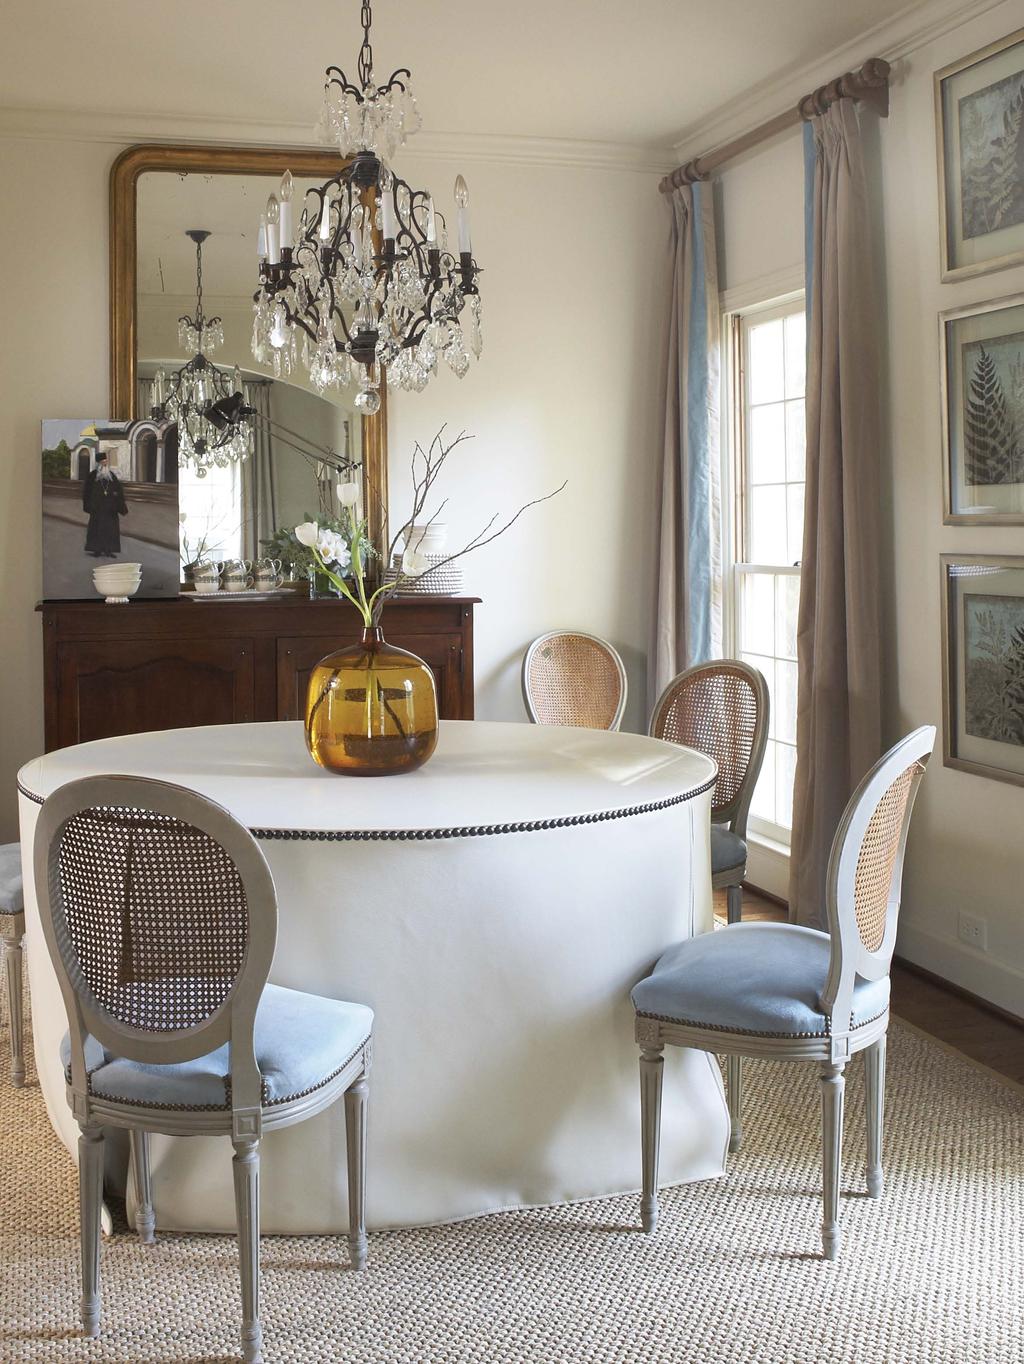 In the dining room, Dana recovered a round pine table with synthetic leather trimmed with nailheads for durable stylish appeal.